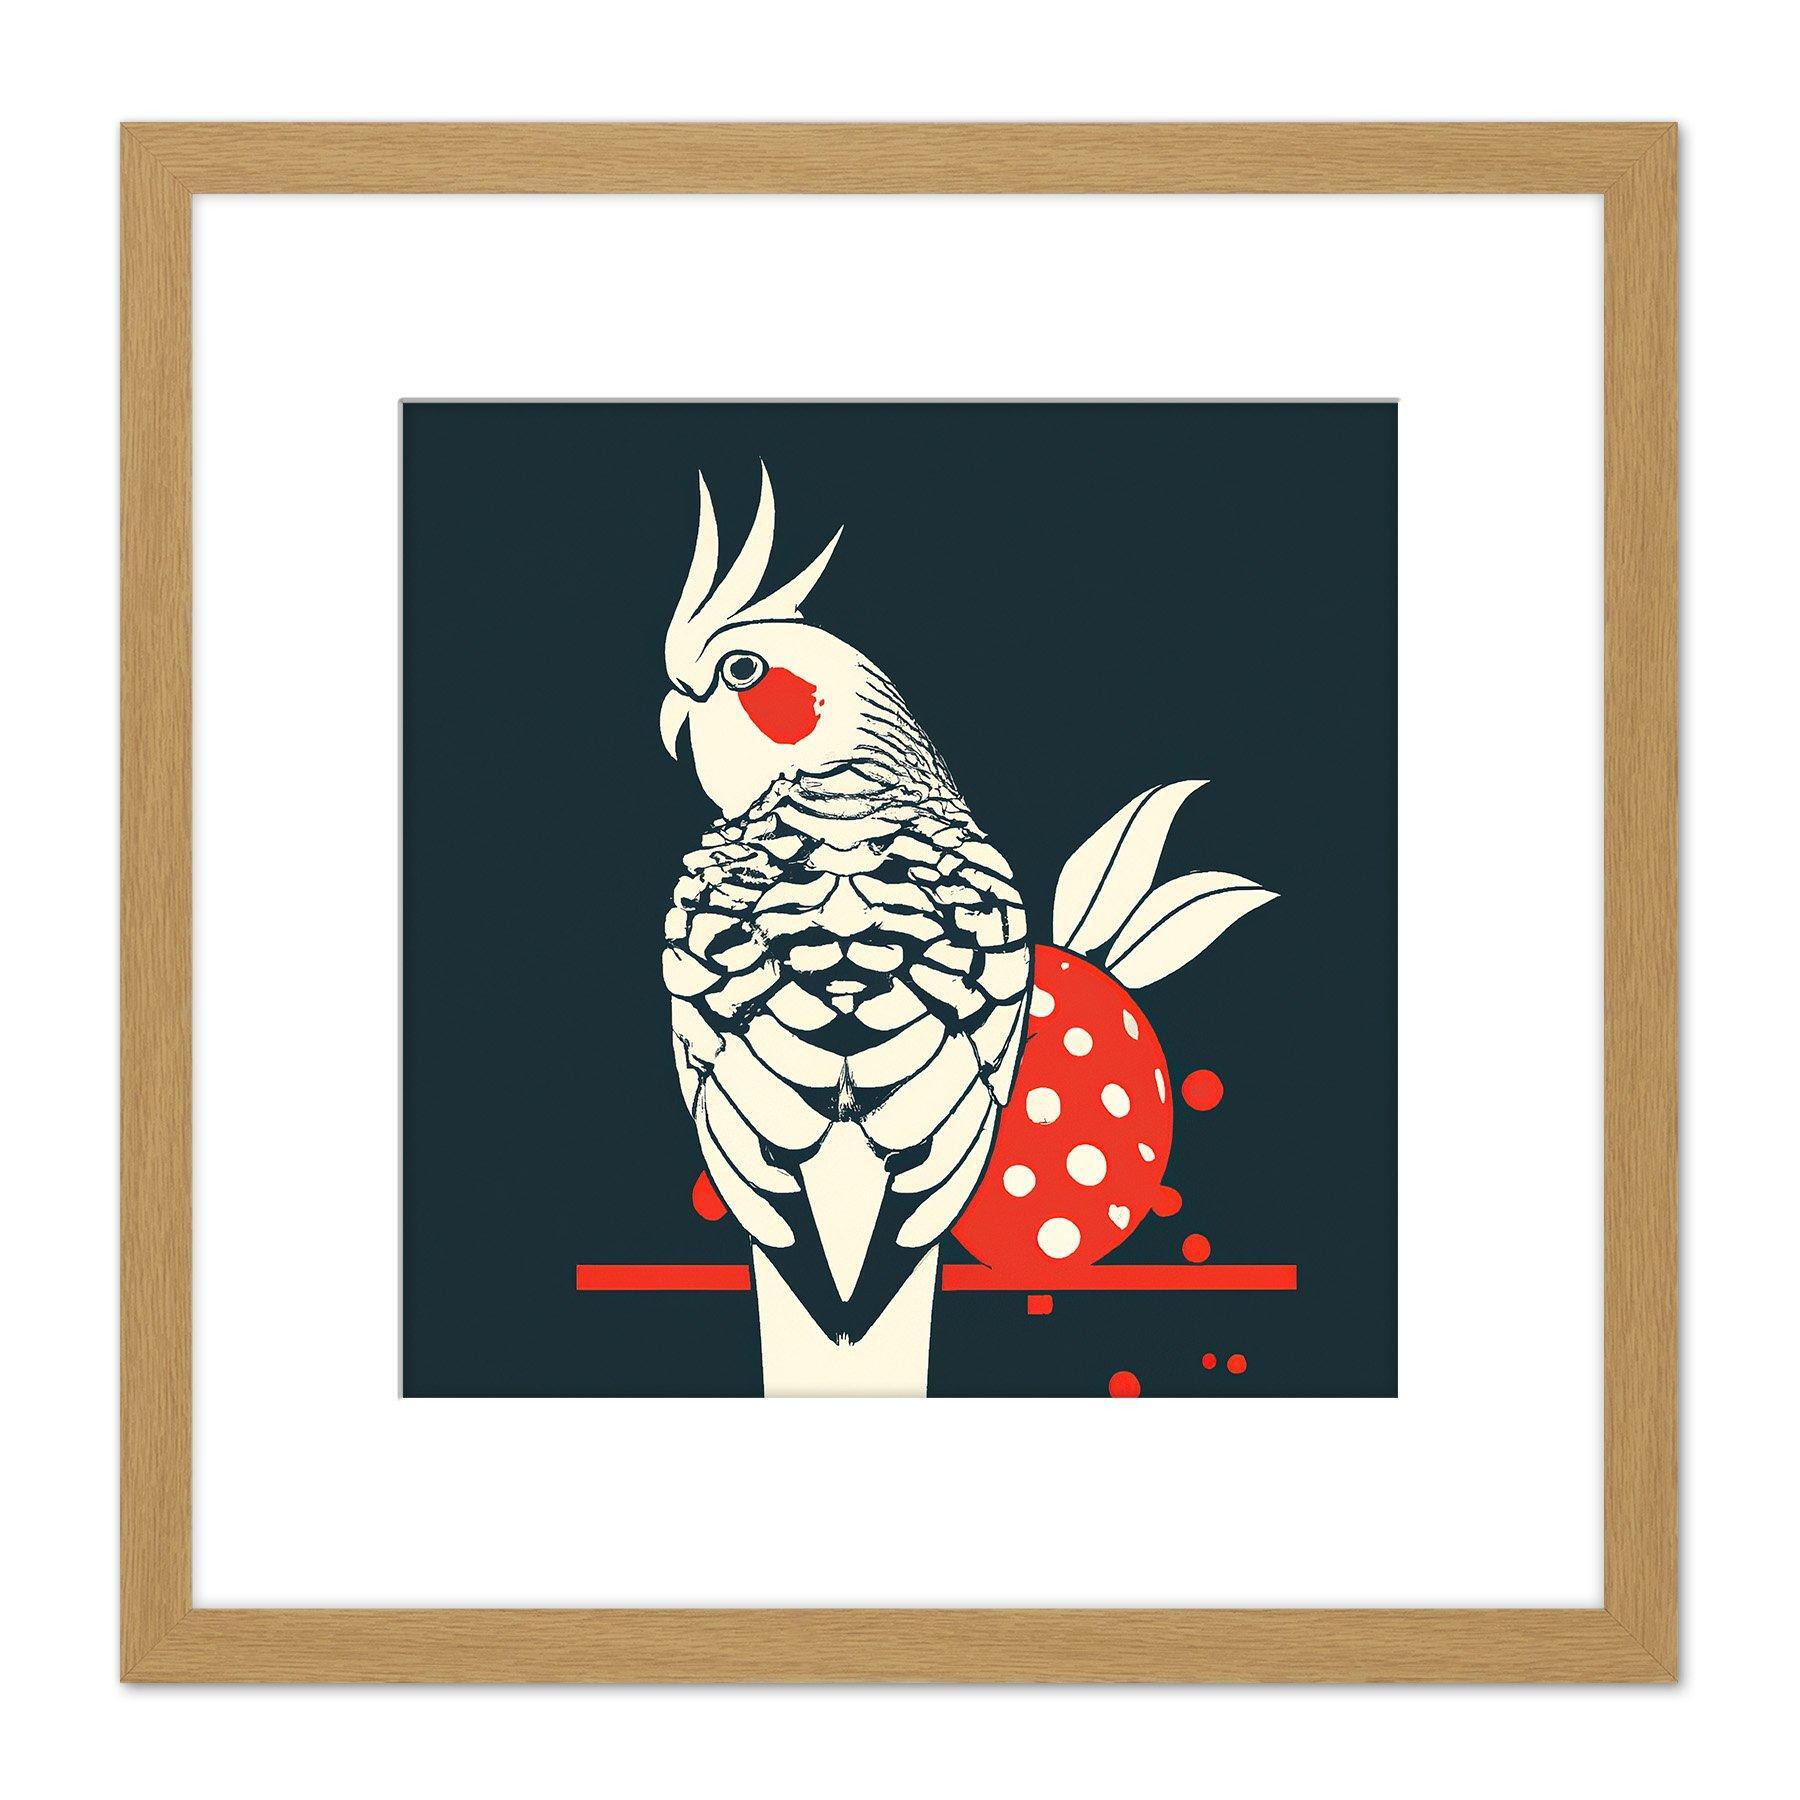 Cockatiel Cockatoo Strawberry Tropical Bird Fruit Modern Retro Style Navy White Red Square Wooden Framed Wall Art Print Picture 8X8 Inch - image 1